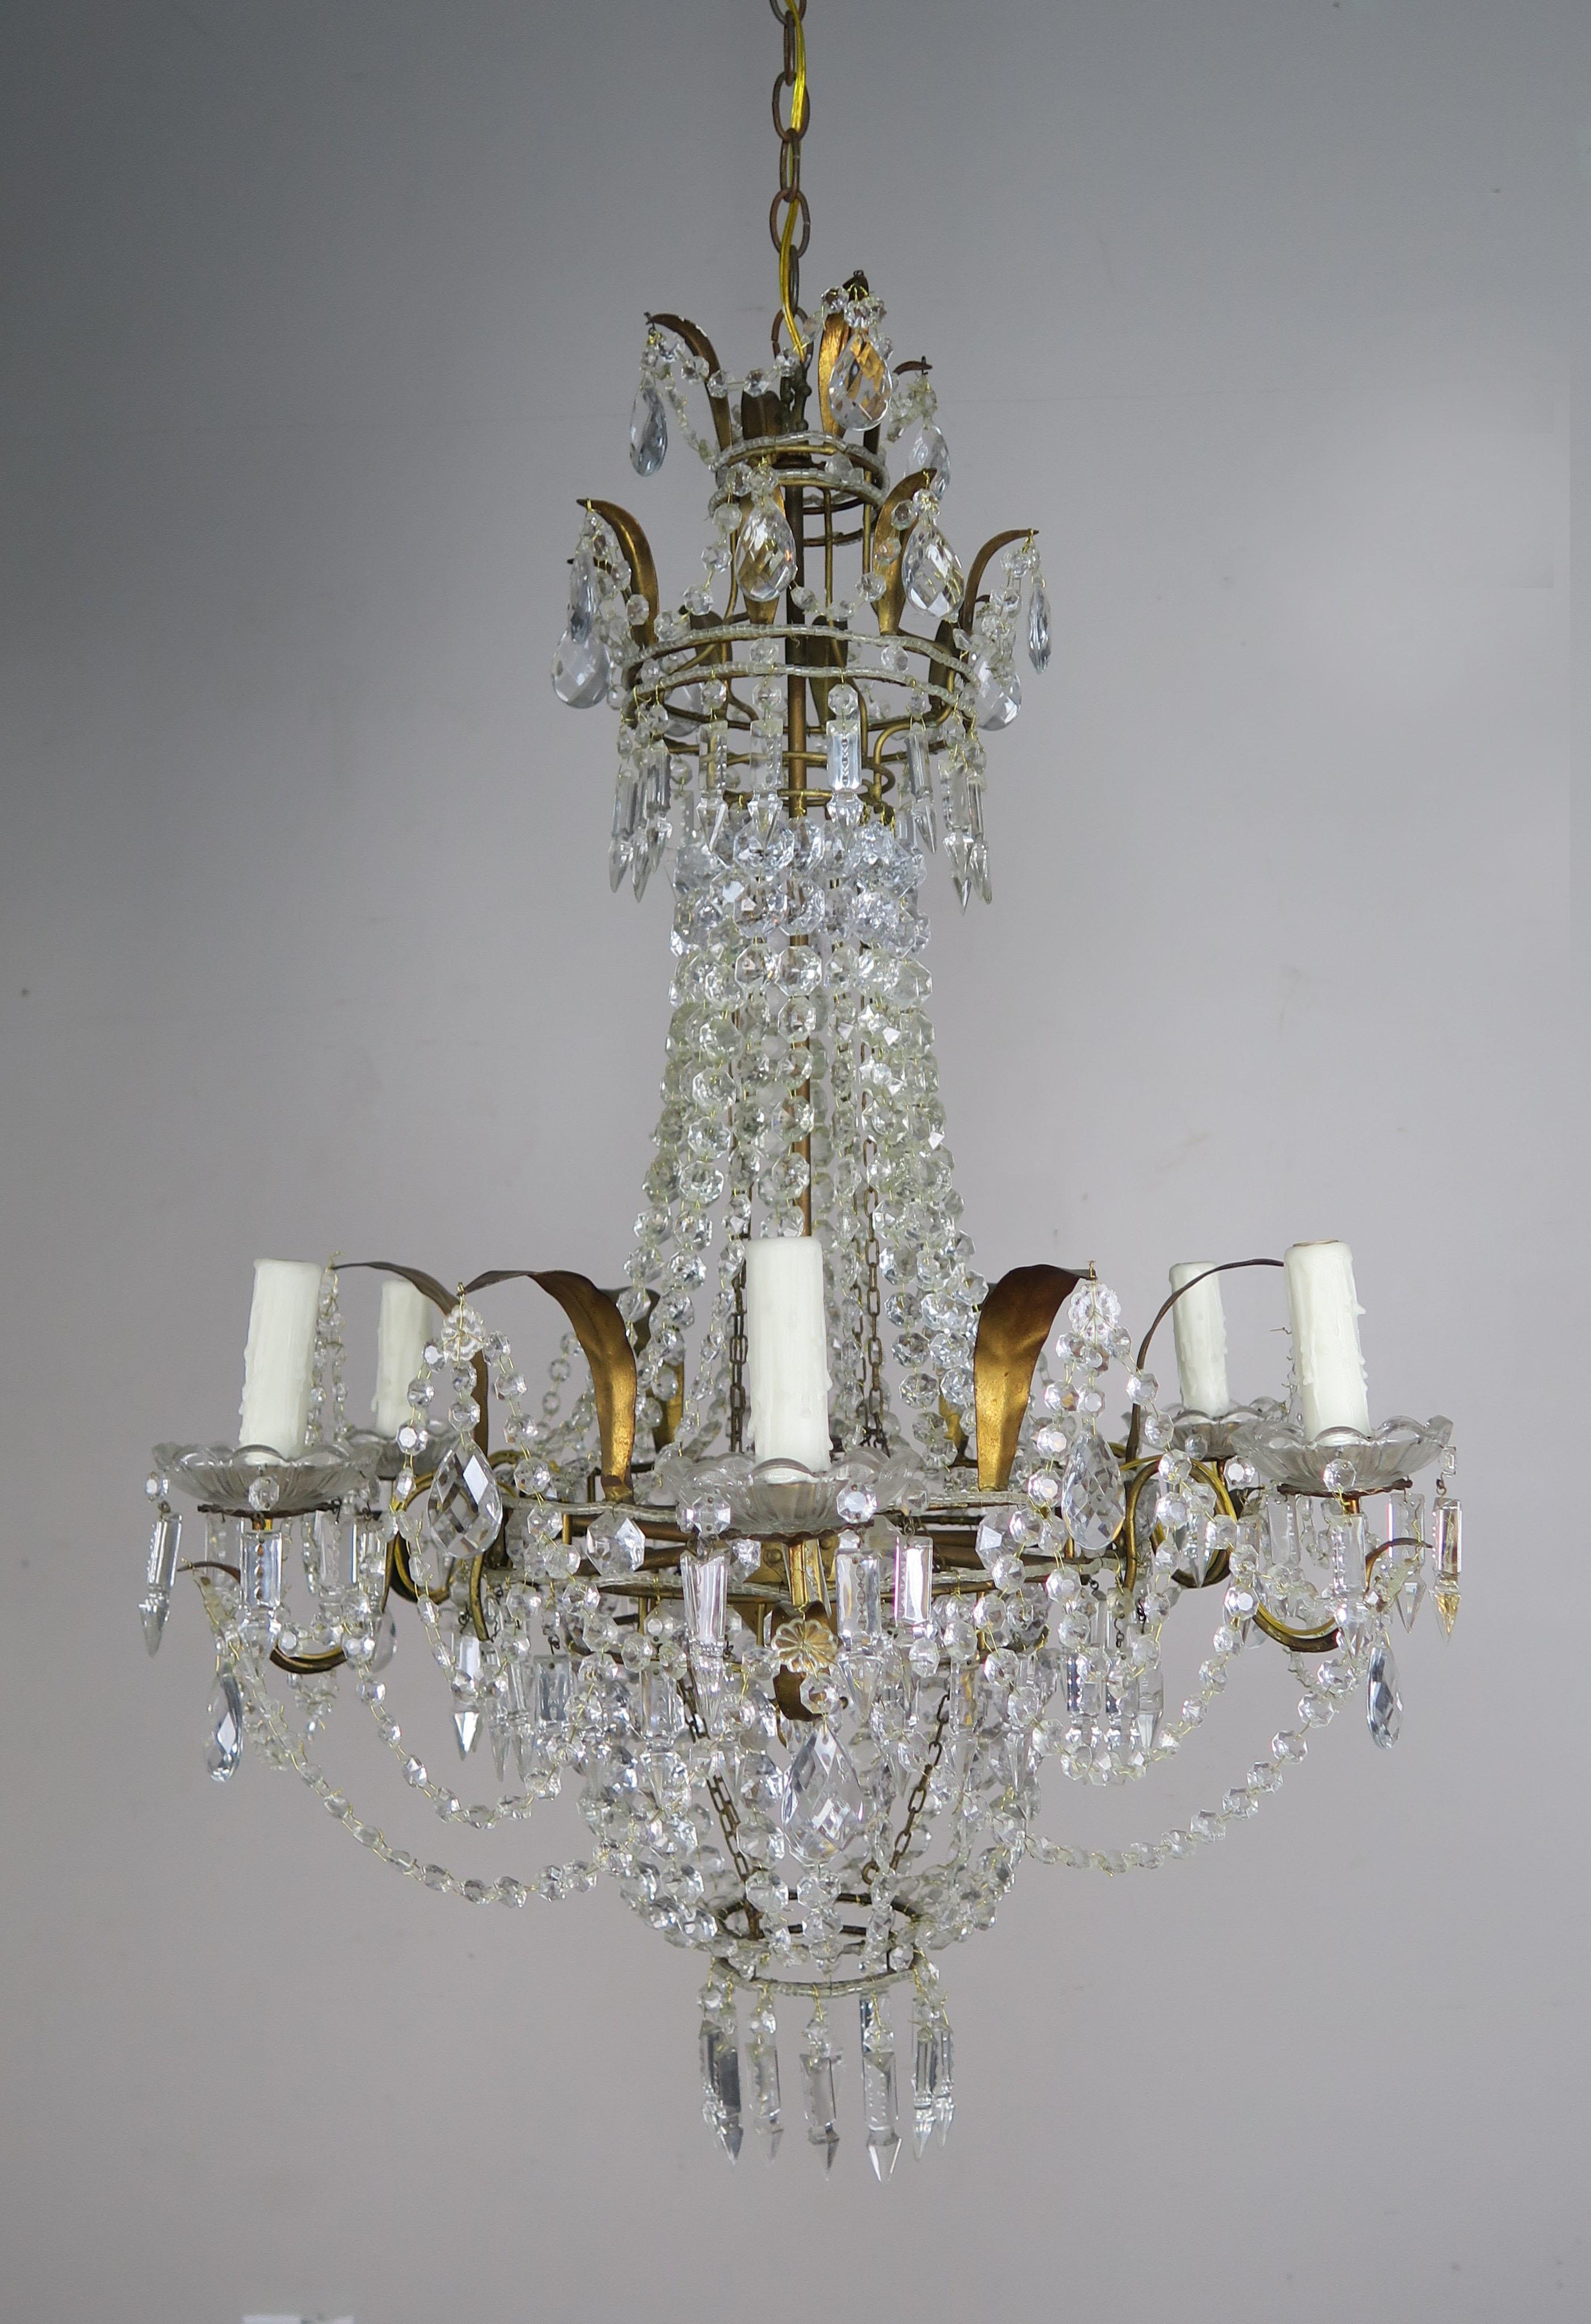 Six light French Louis XV style gilt metal crystal beaded chandelier with garlands of crystals incorporated throughout the fixture. The garlands form unique patterns that make this fixture unlike any I have seen. The chandelier is newly rewired with